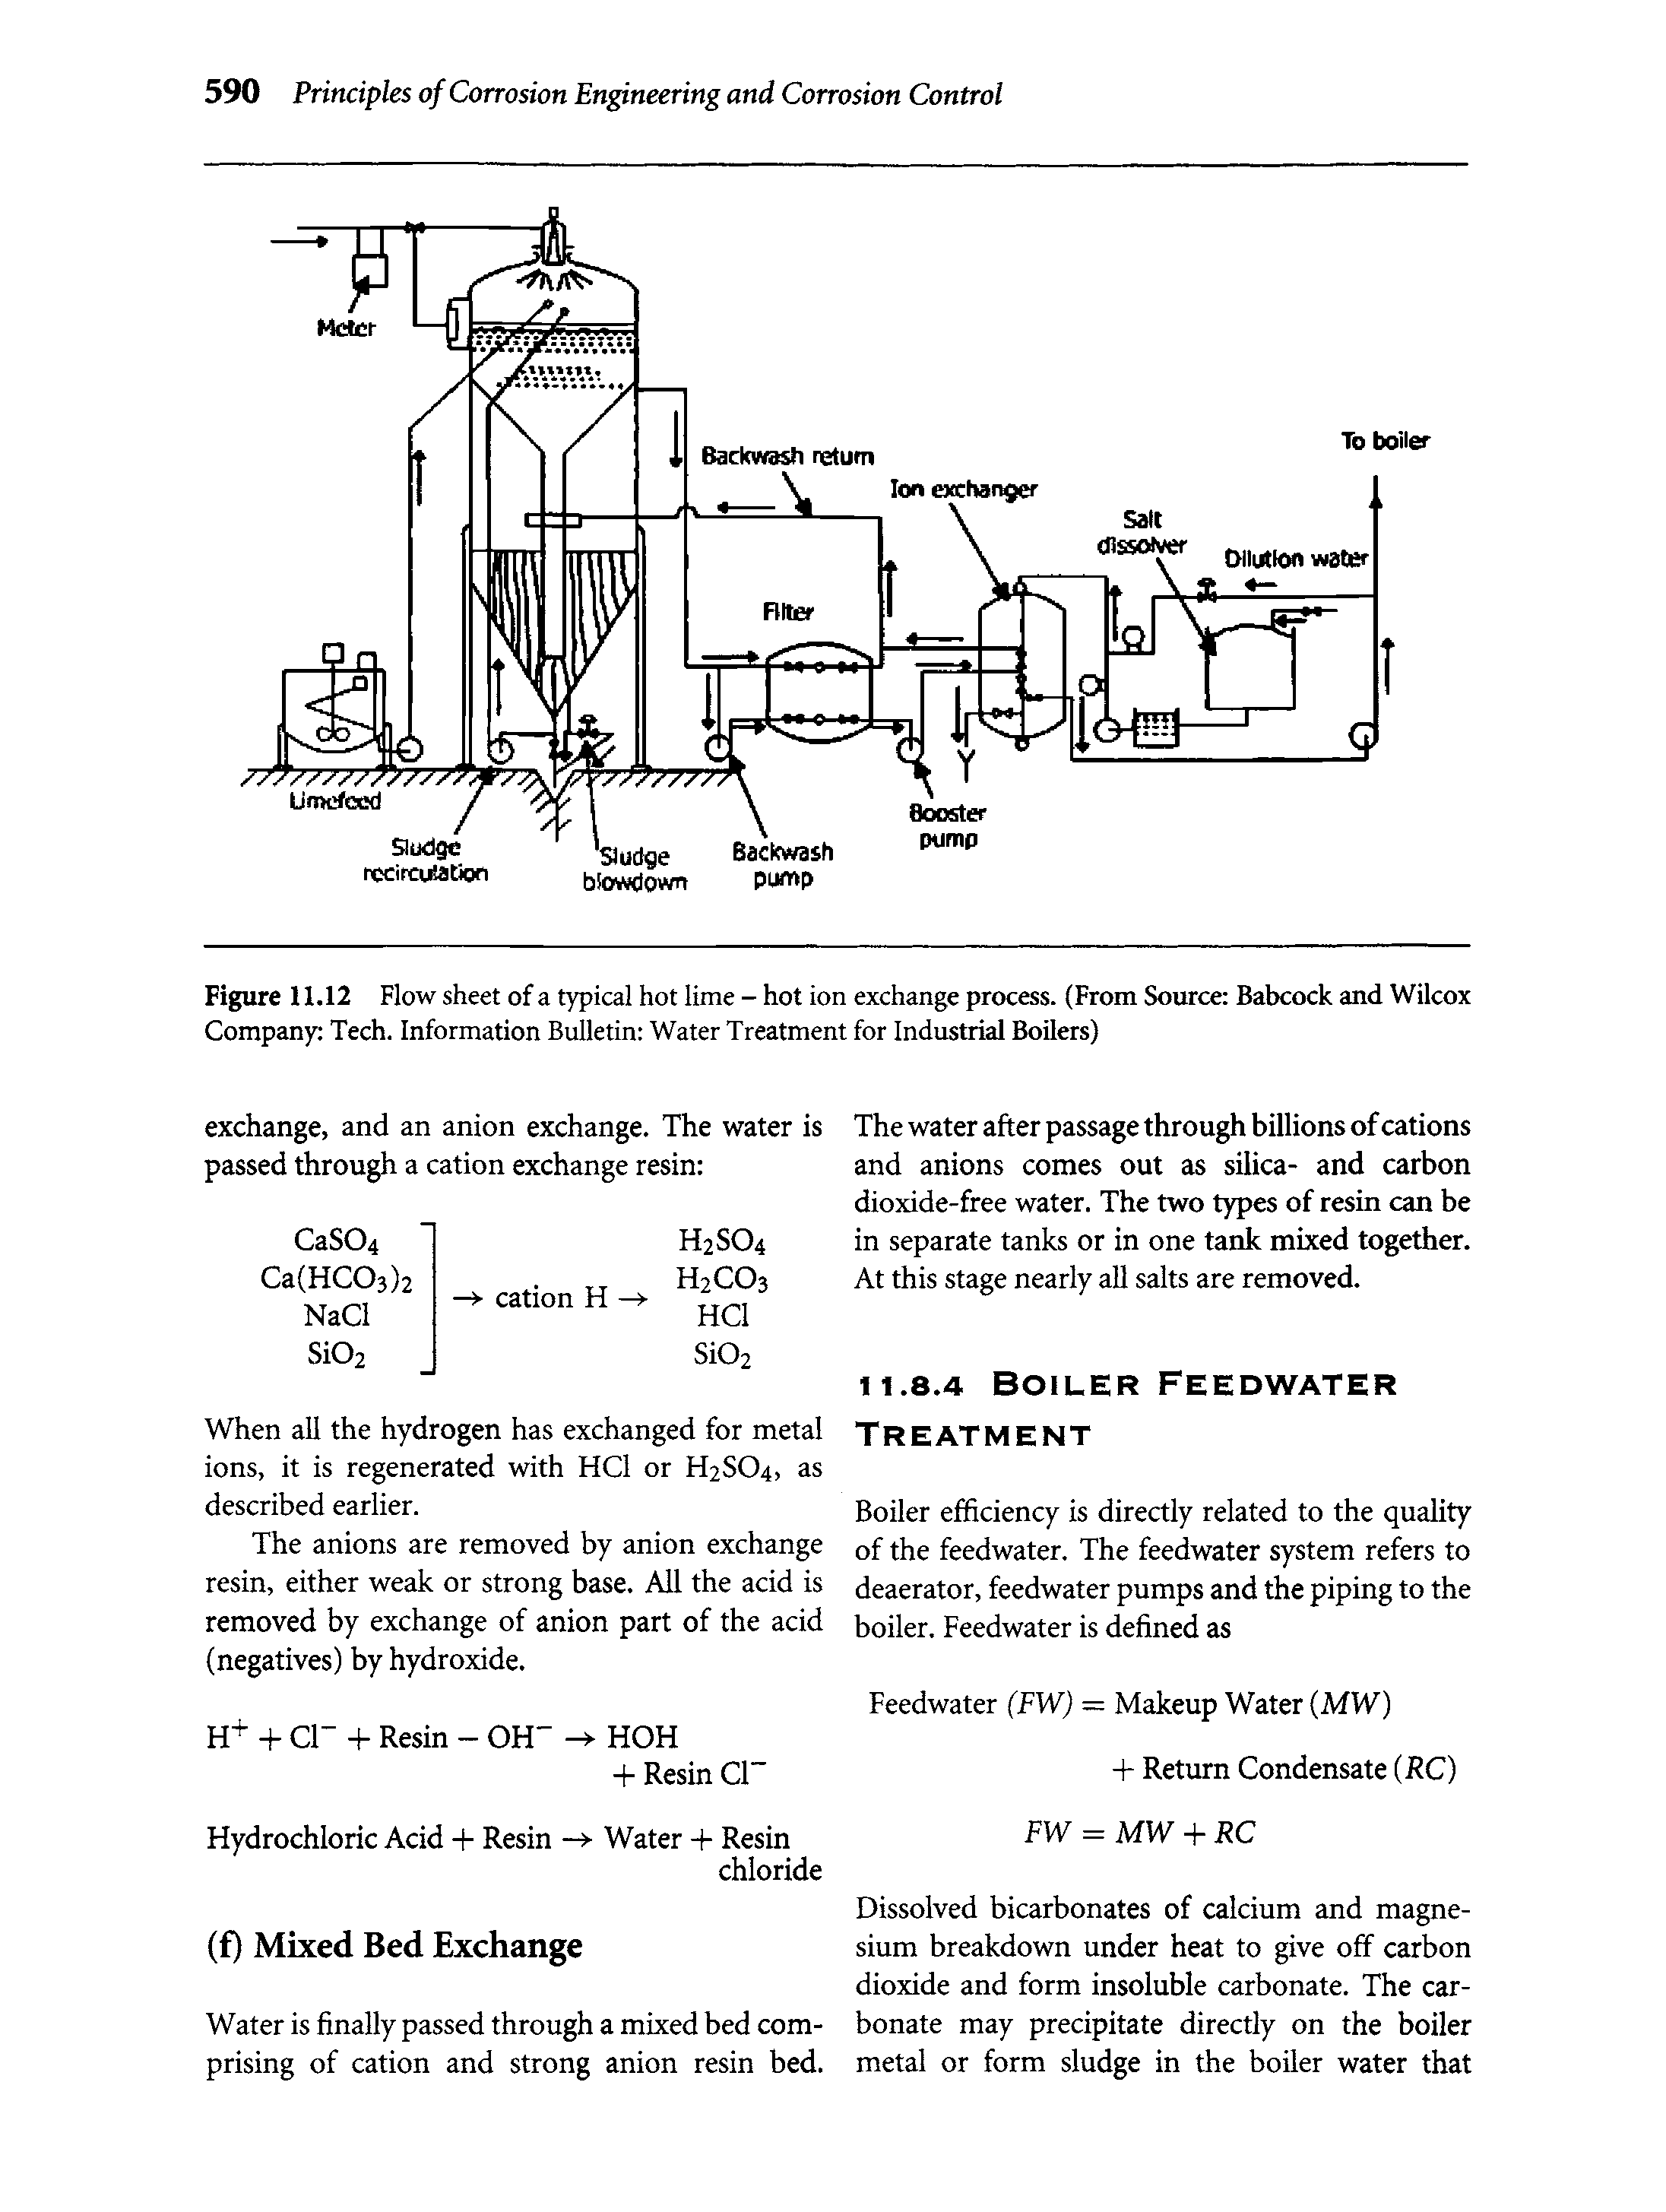 Figure 11.12 Flow sheet of a typical hot lime - hot ion exchange process. (From Source Babcock and Wilcox Company Tech. Information Bulletin Water Treatment for Industrial Boilers)...